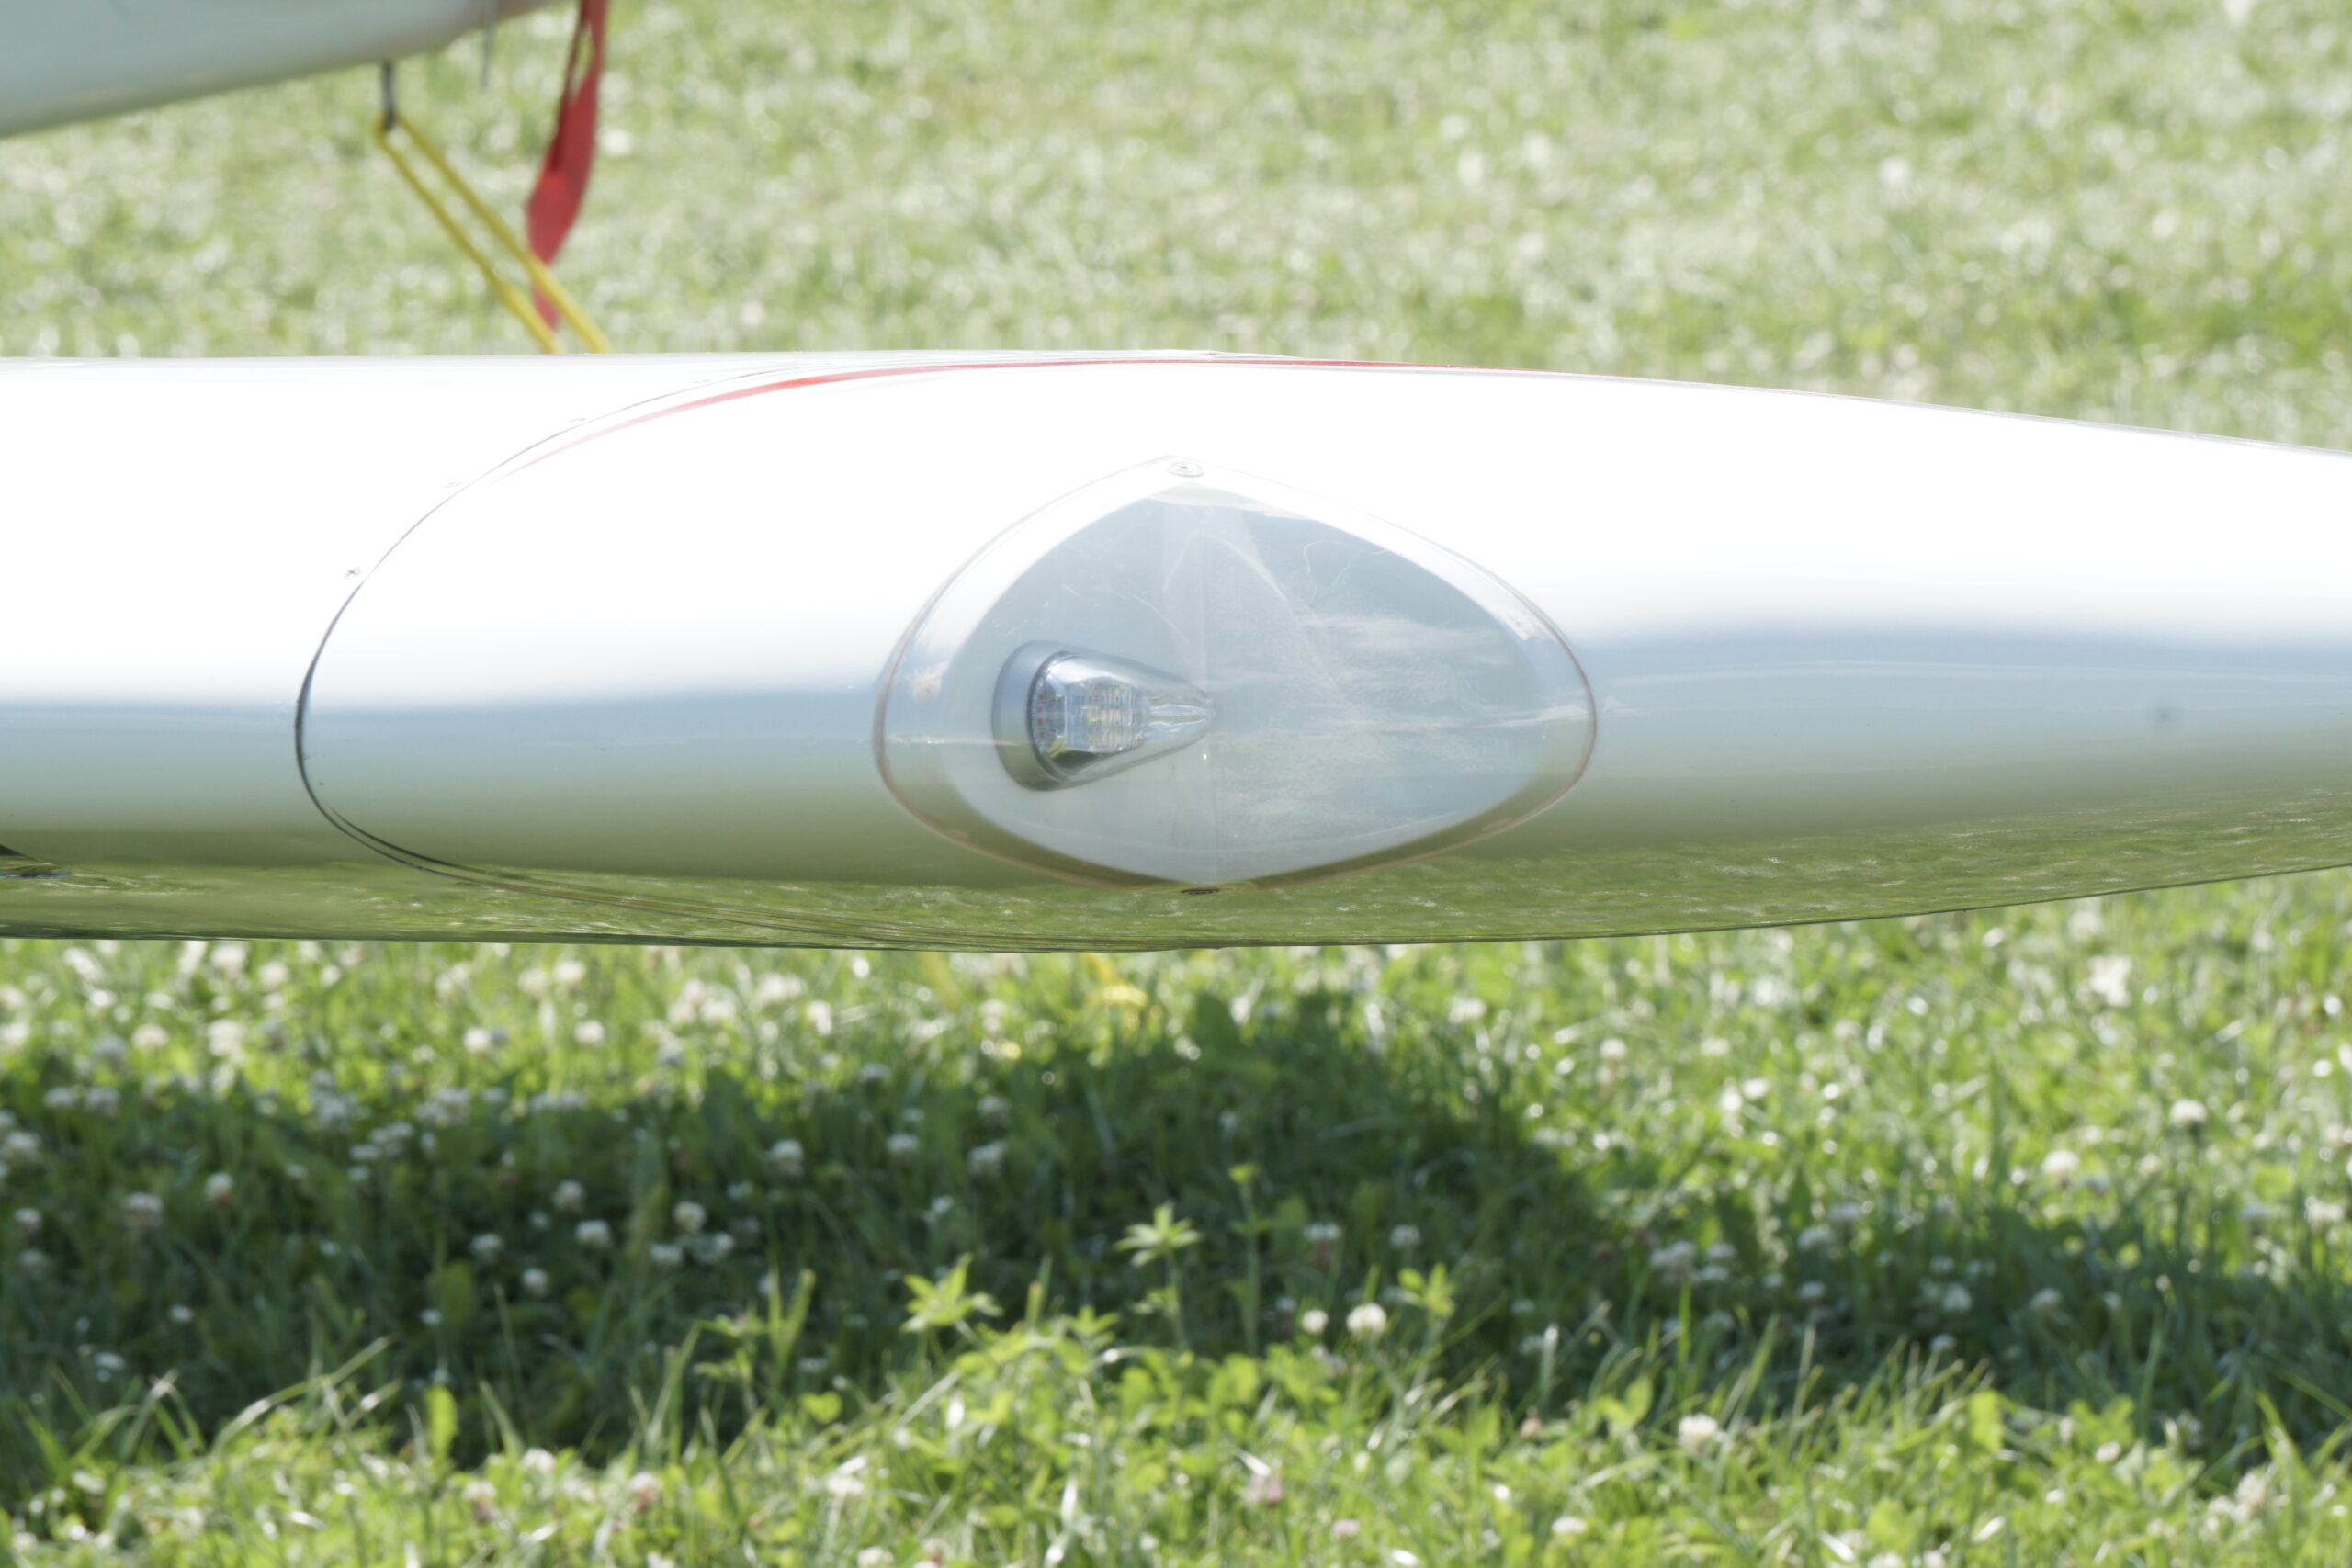 An image of Rv7